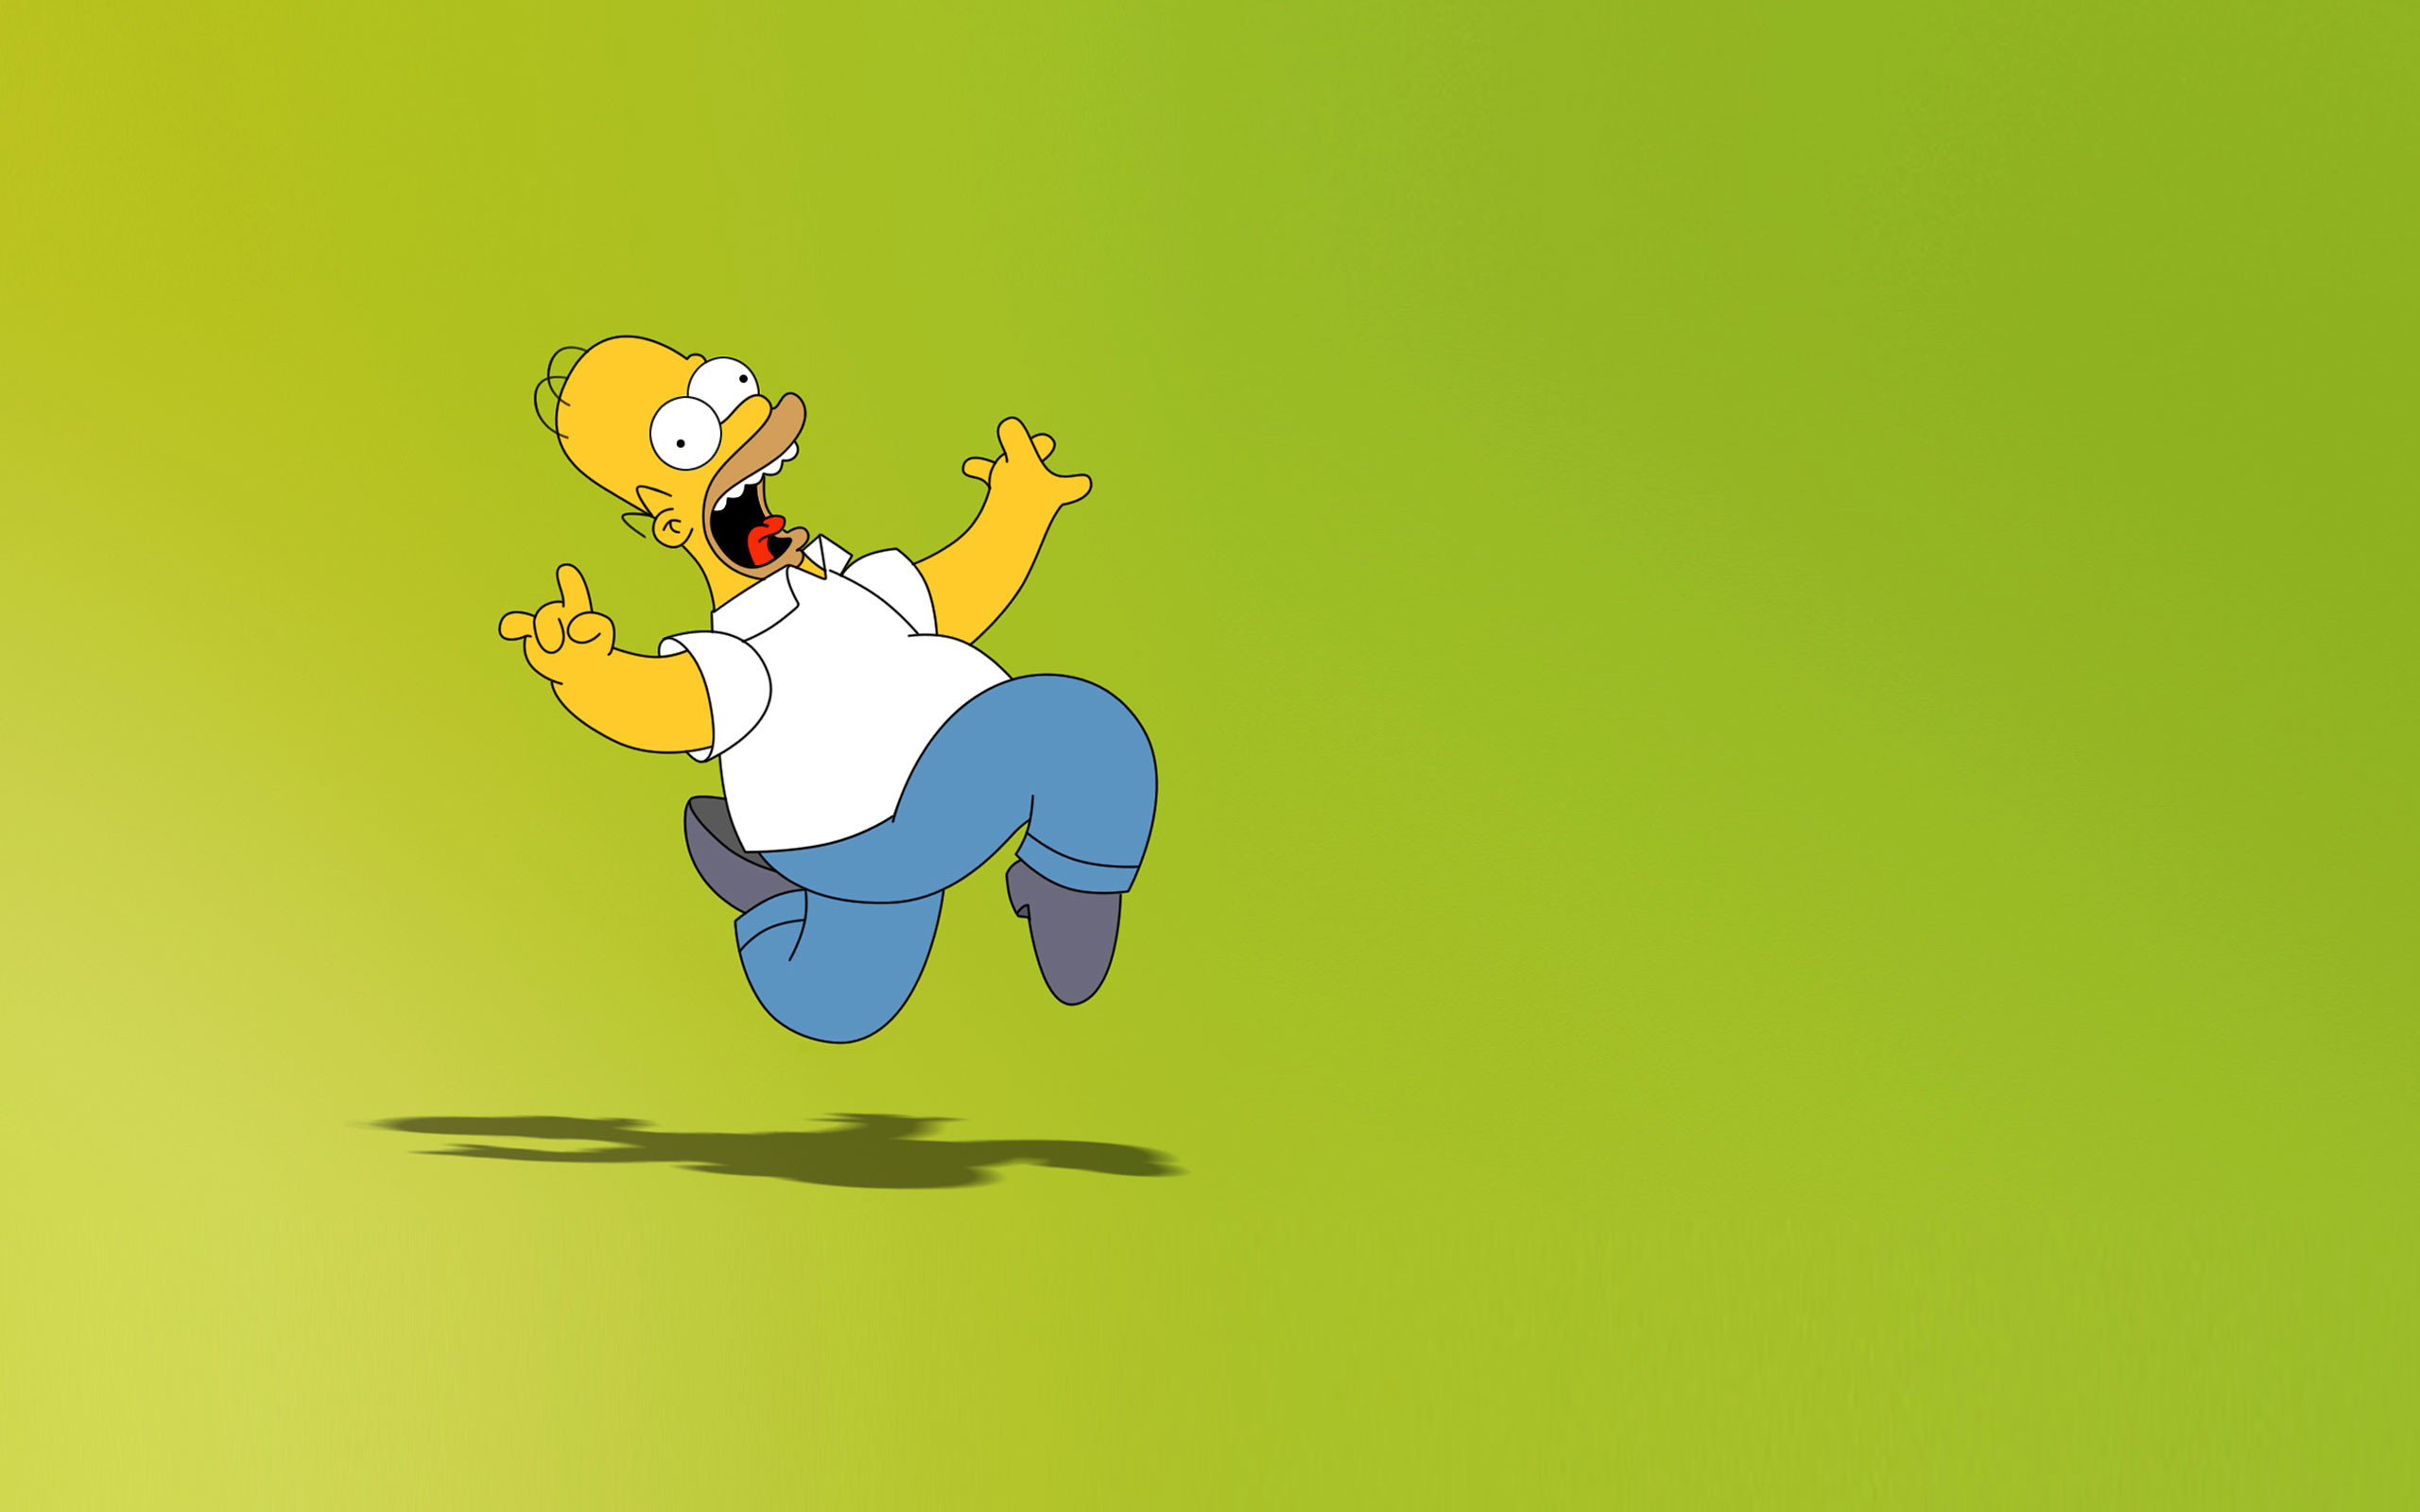 Funny Simpsons Wallpaper Image